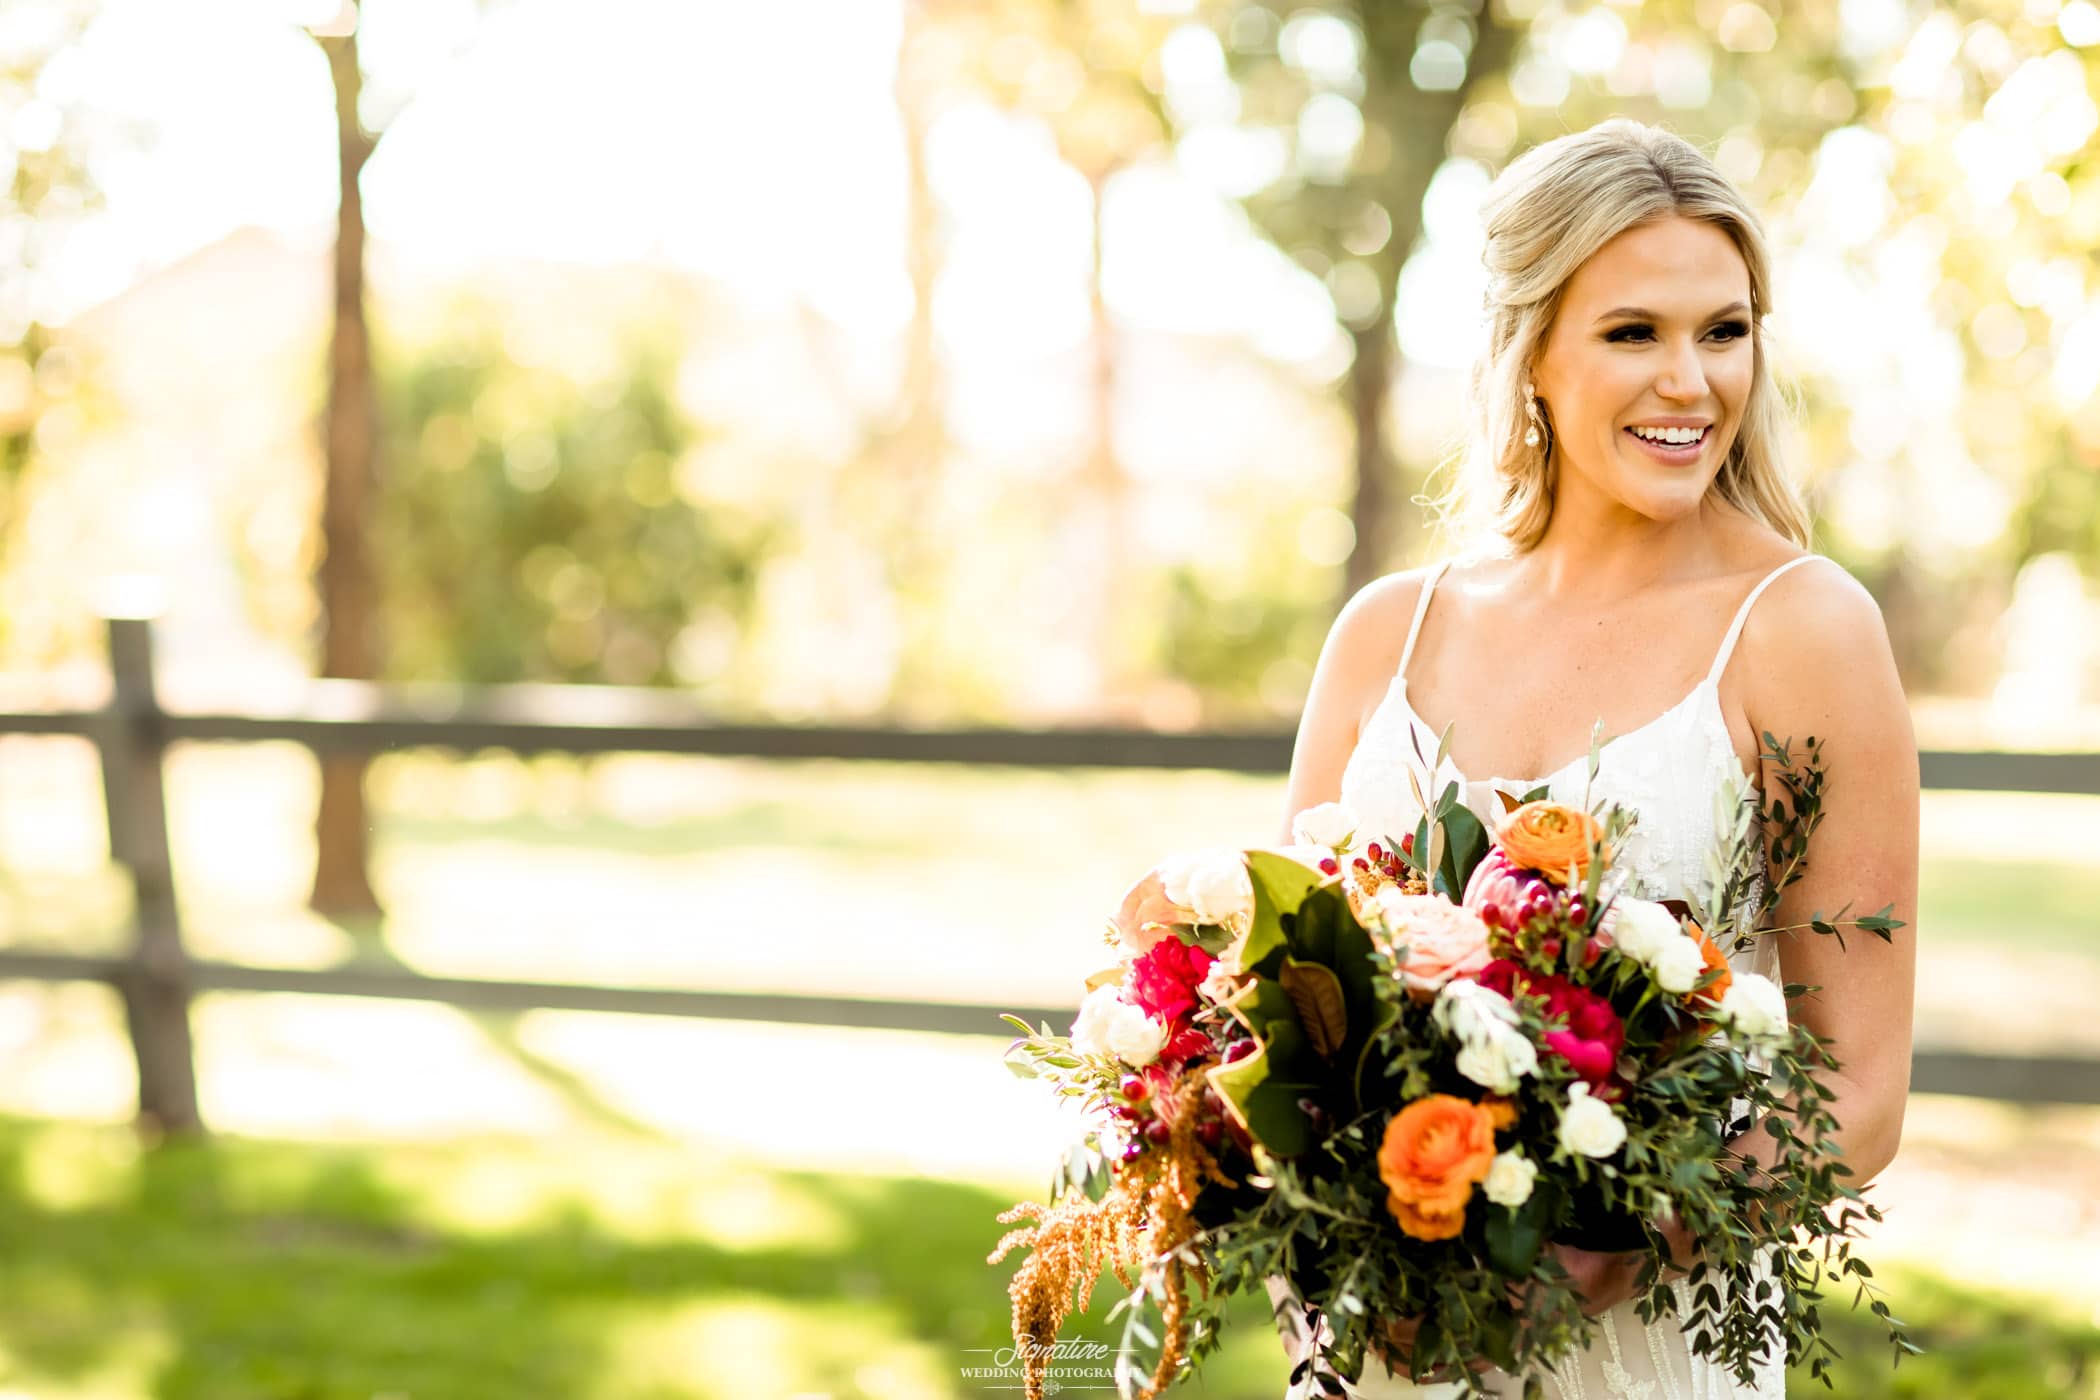 Bride with bouquet smiling